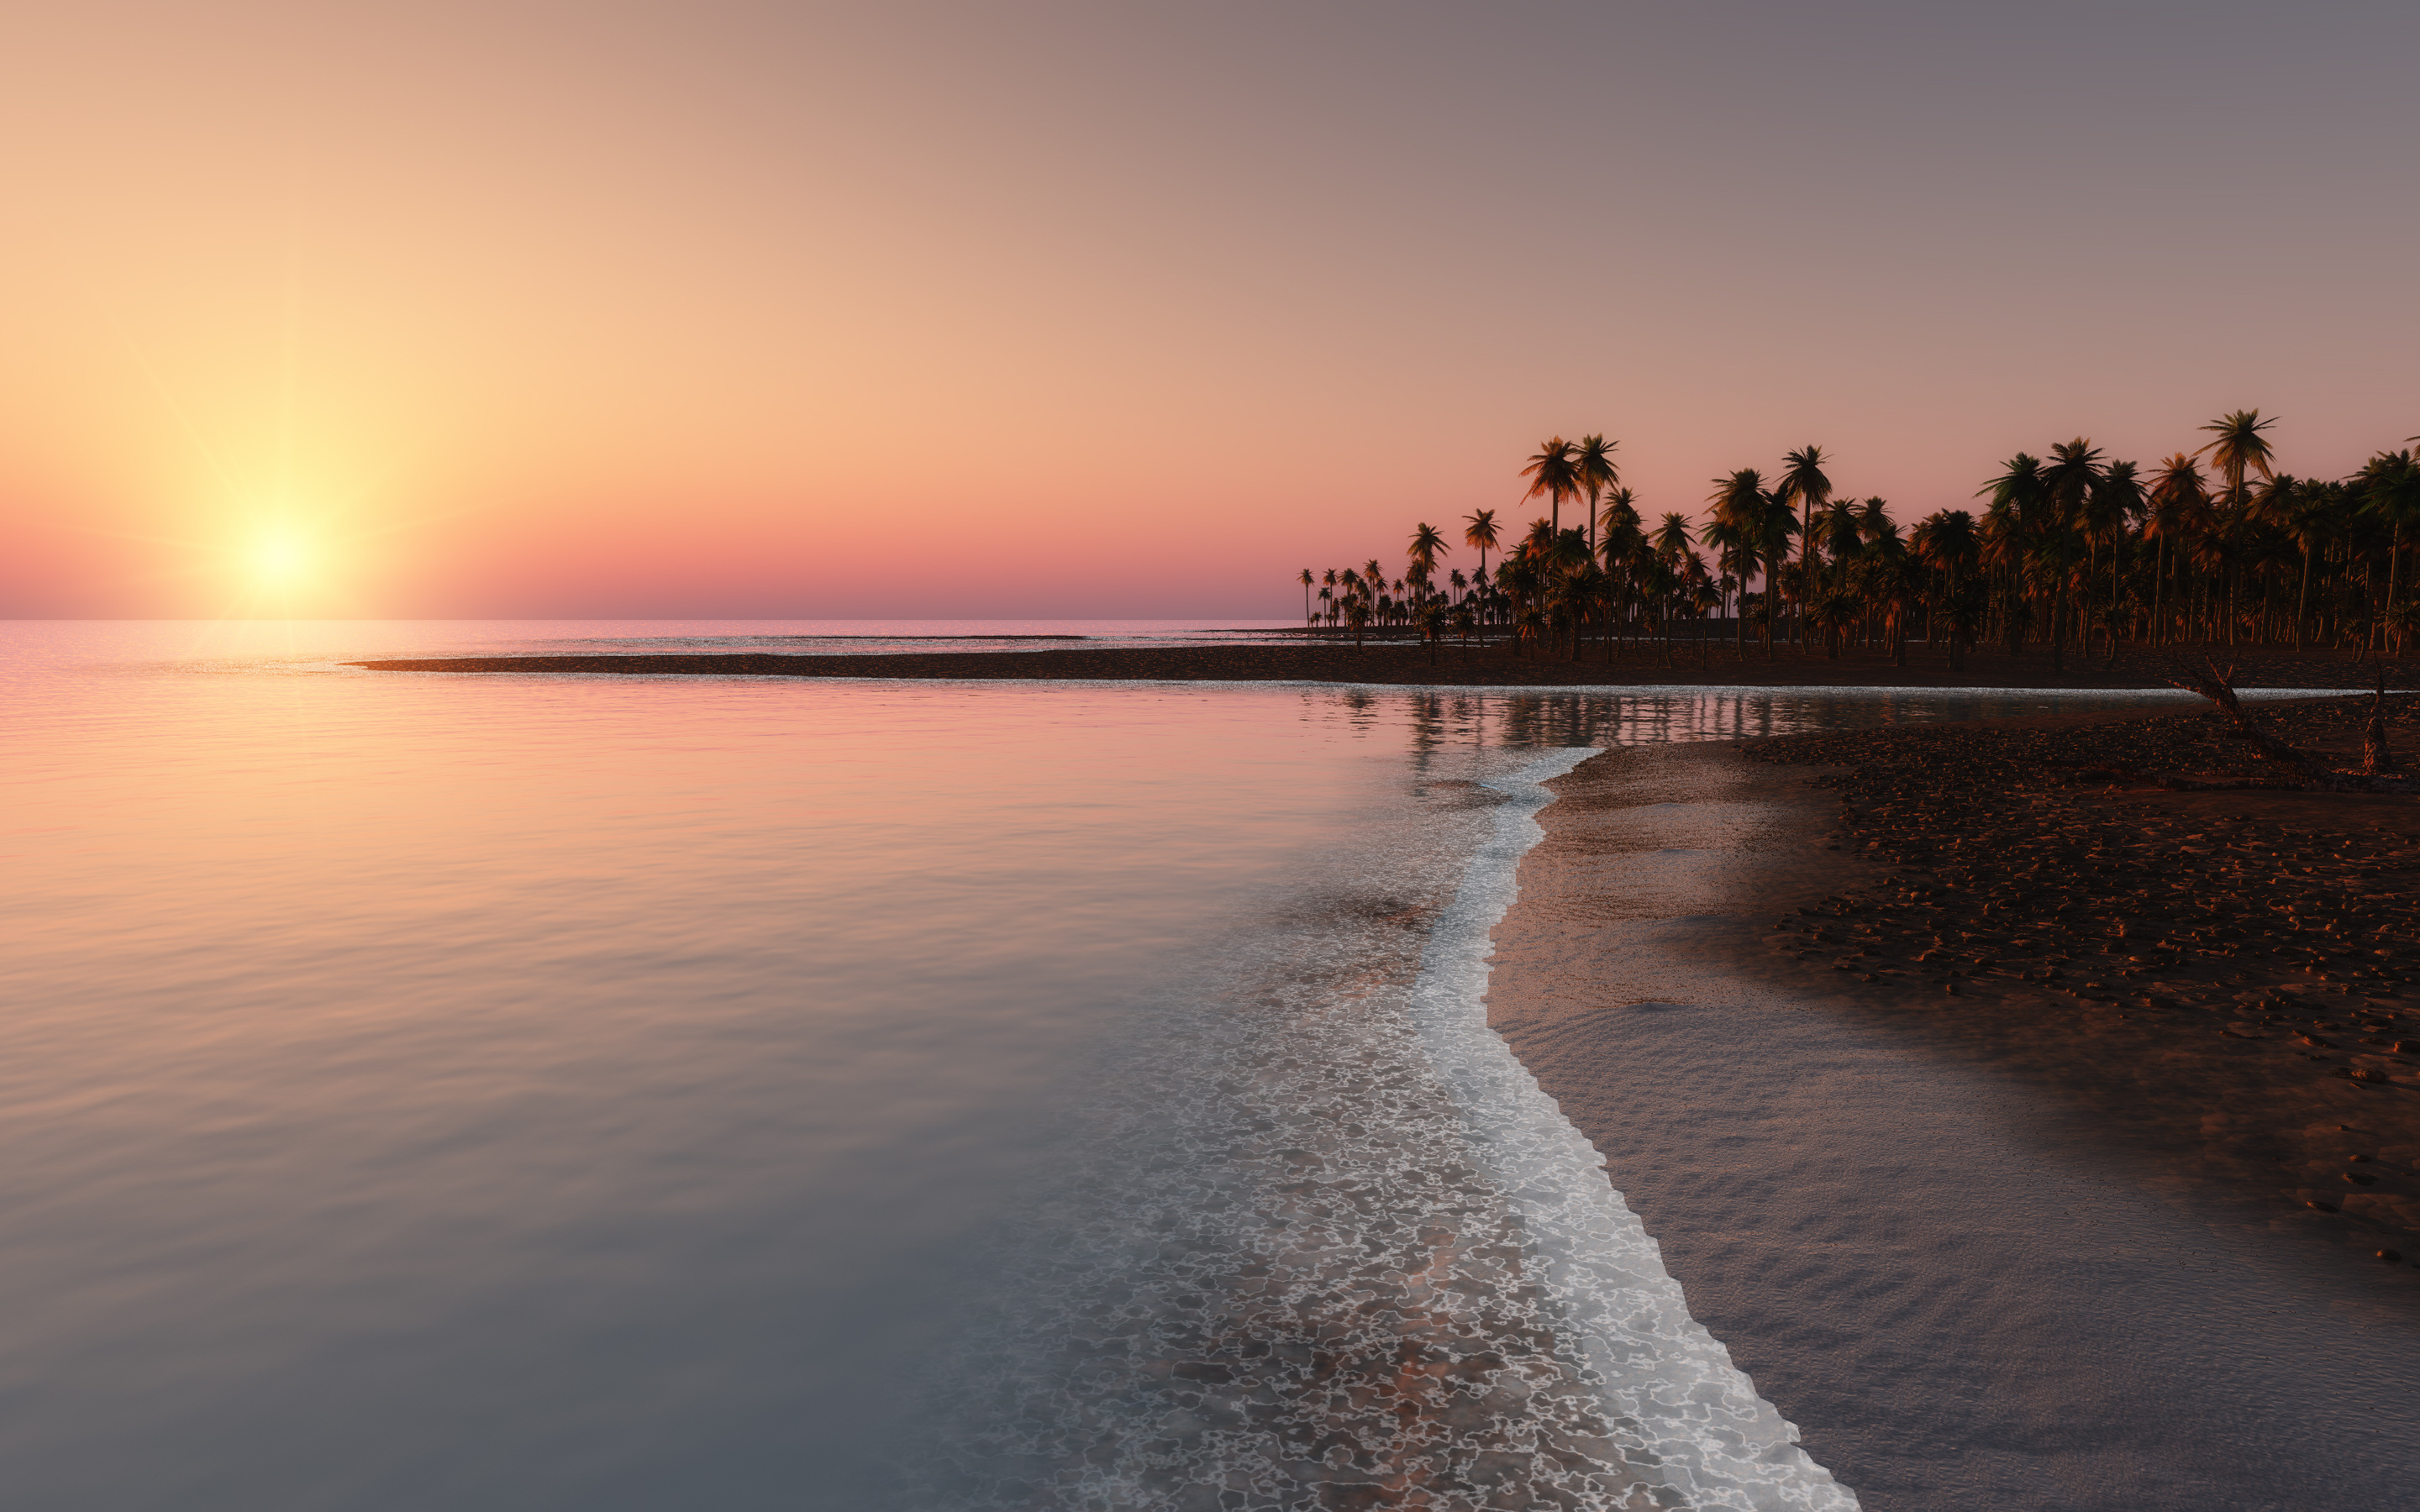 77608 download wallpaper sunset, nature, sky, palms, coast, ocean, tropics screensavers and pictures for free